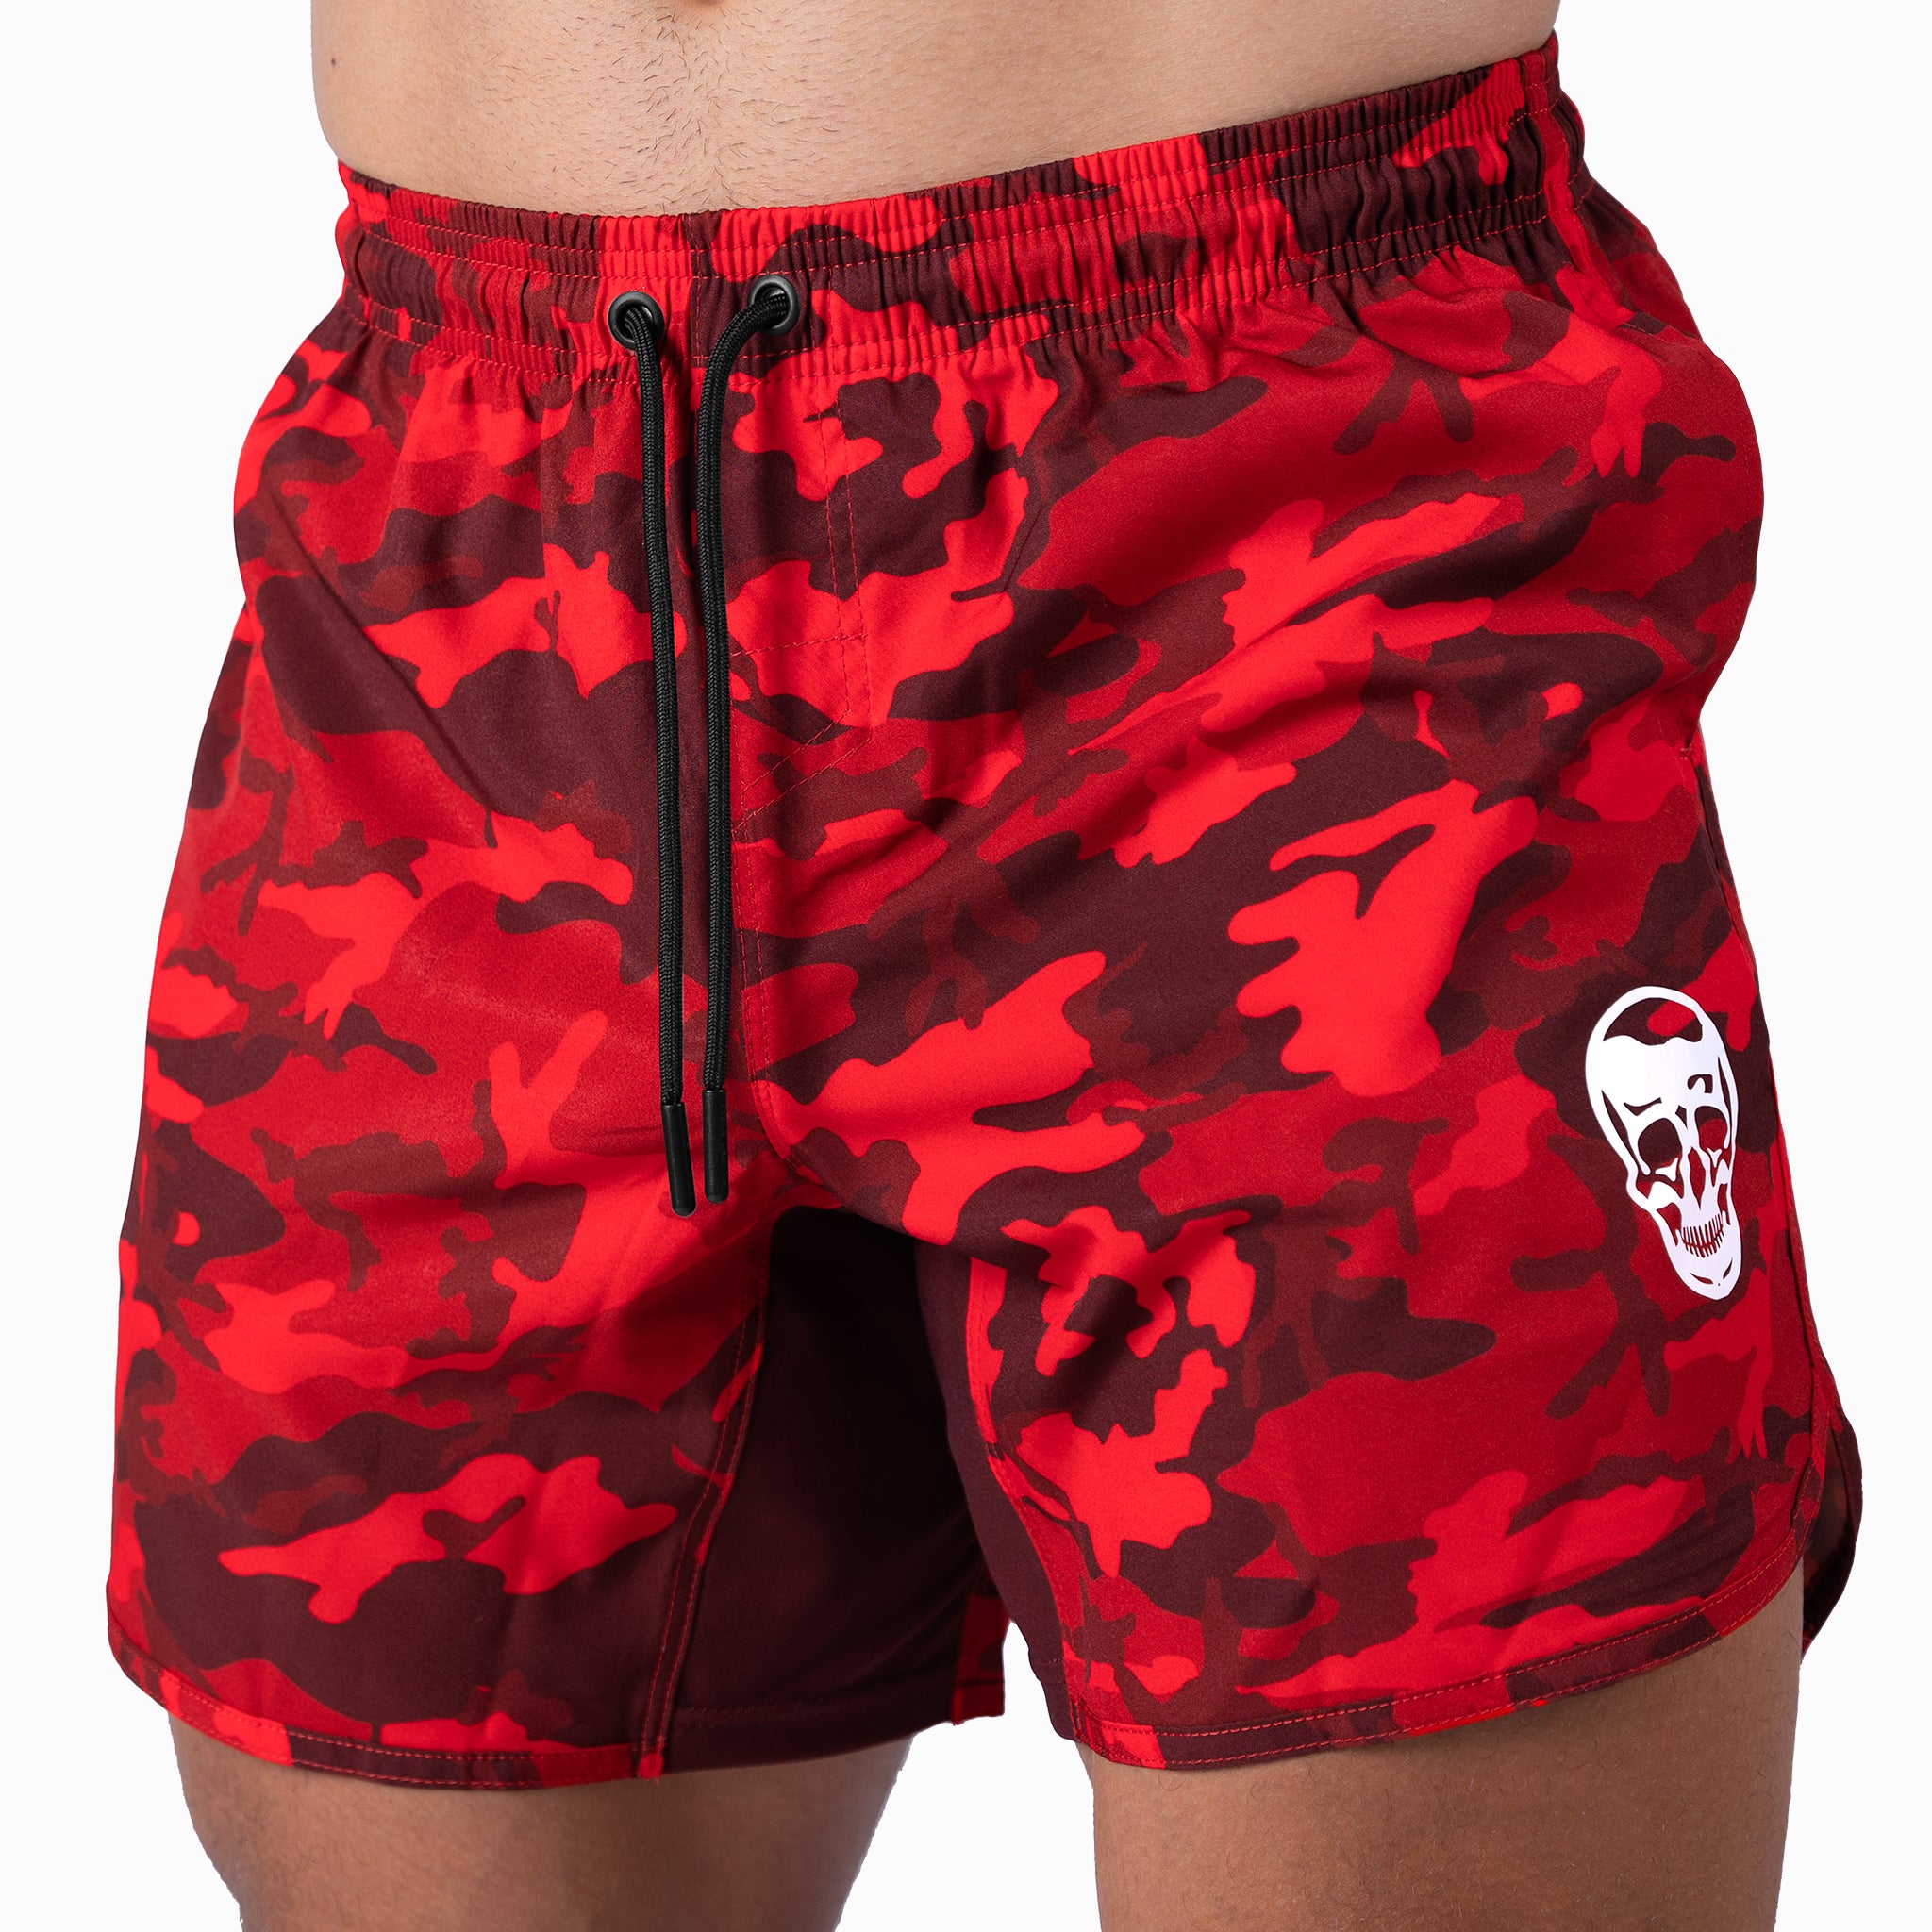 CAMOUFLAGE TRAINING S/S TOP & SHORTS